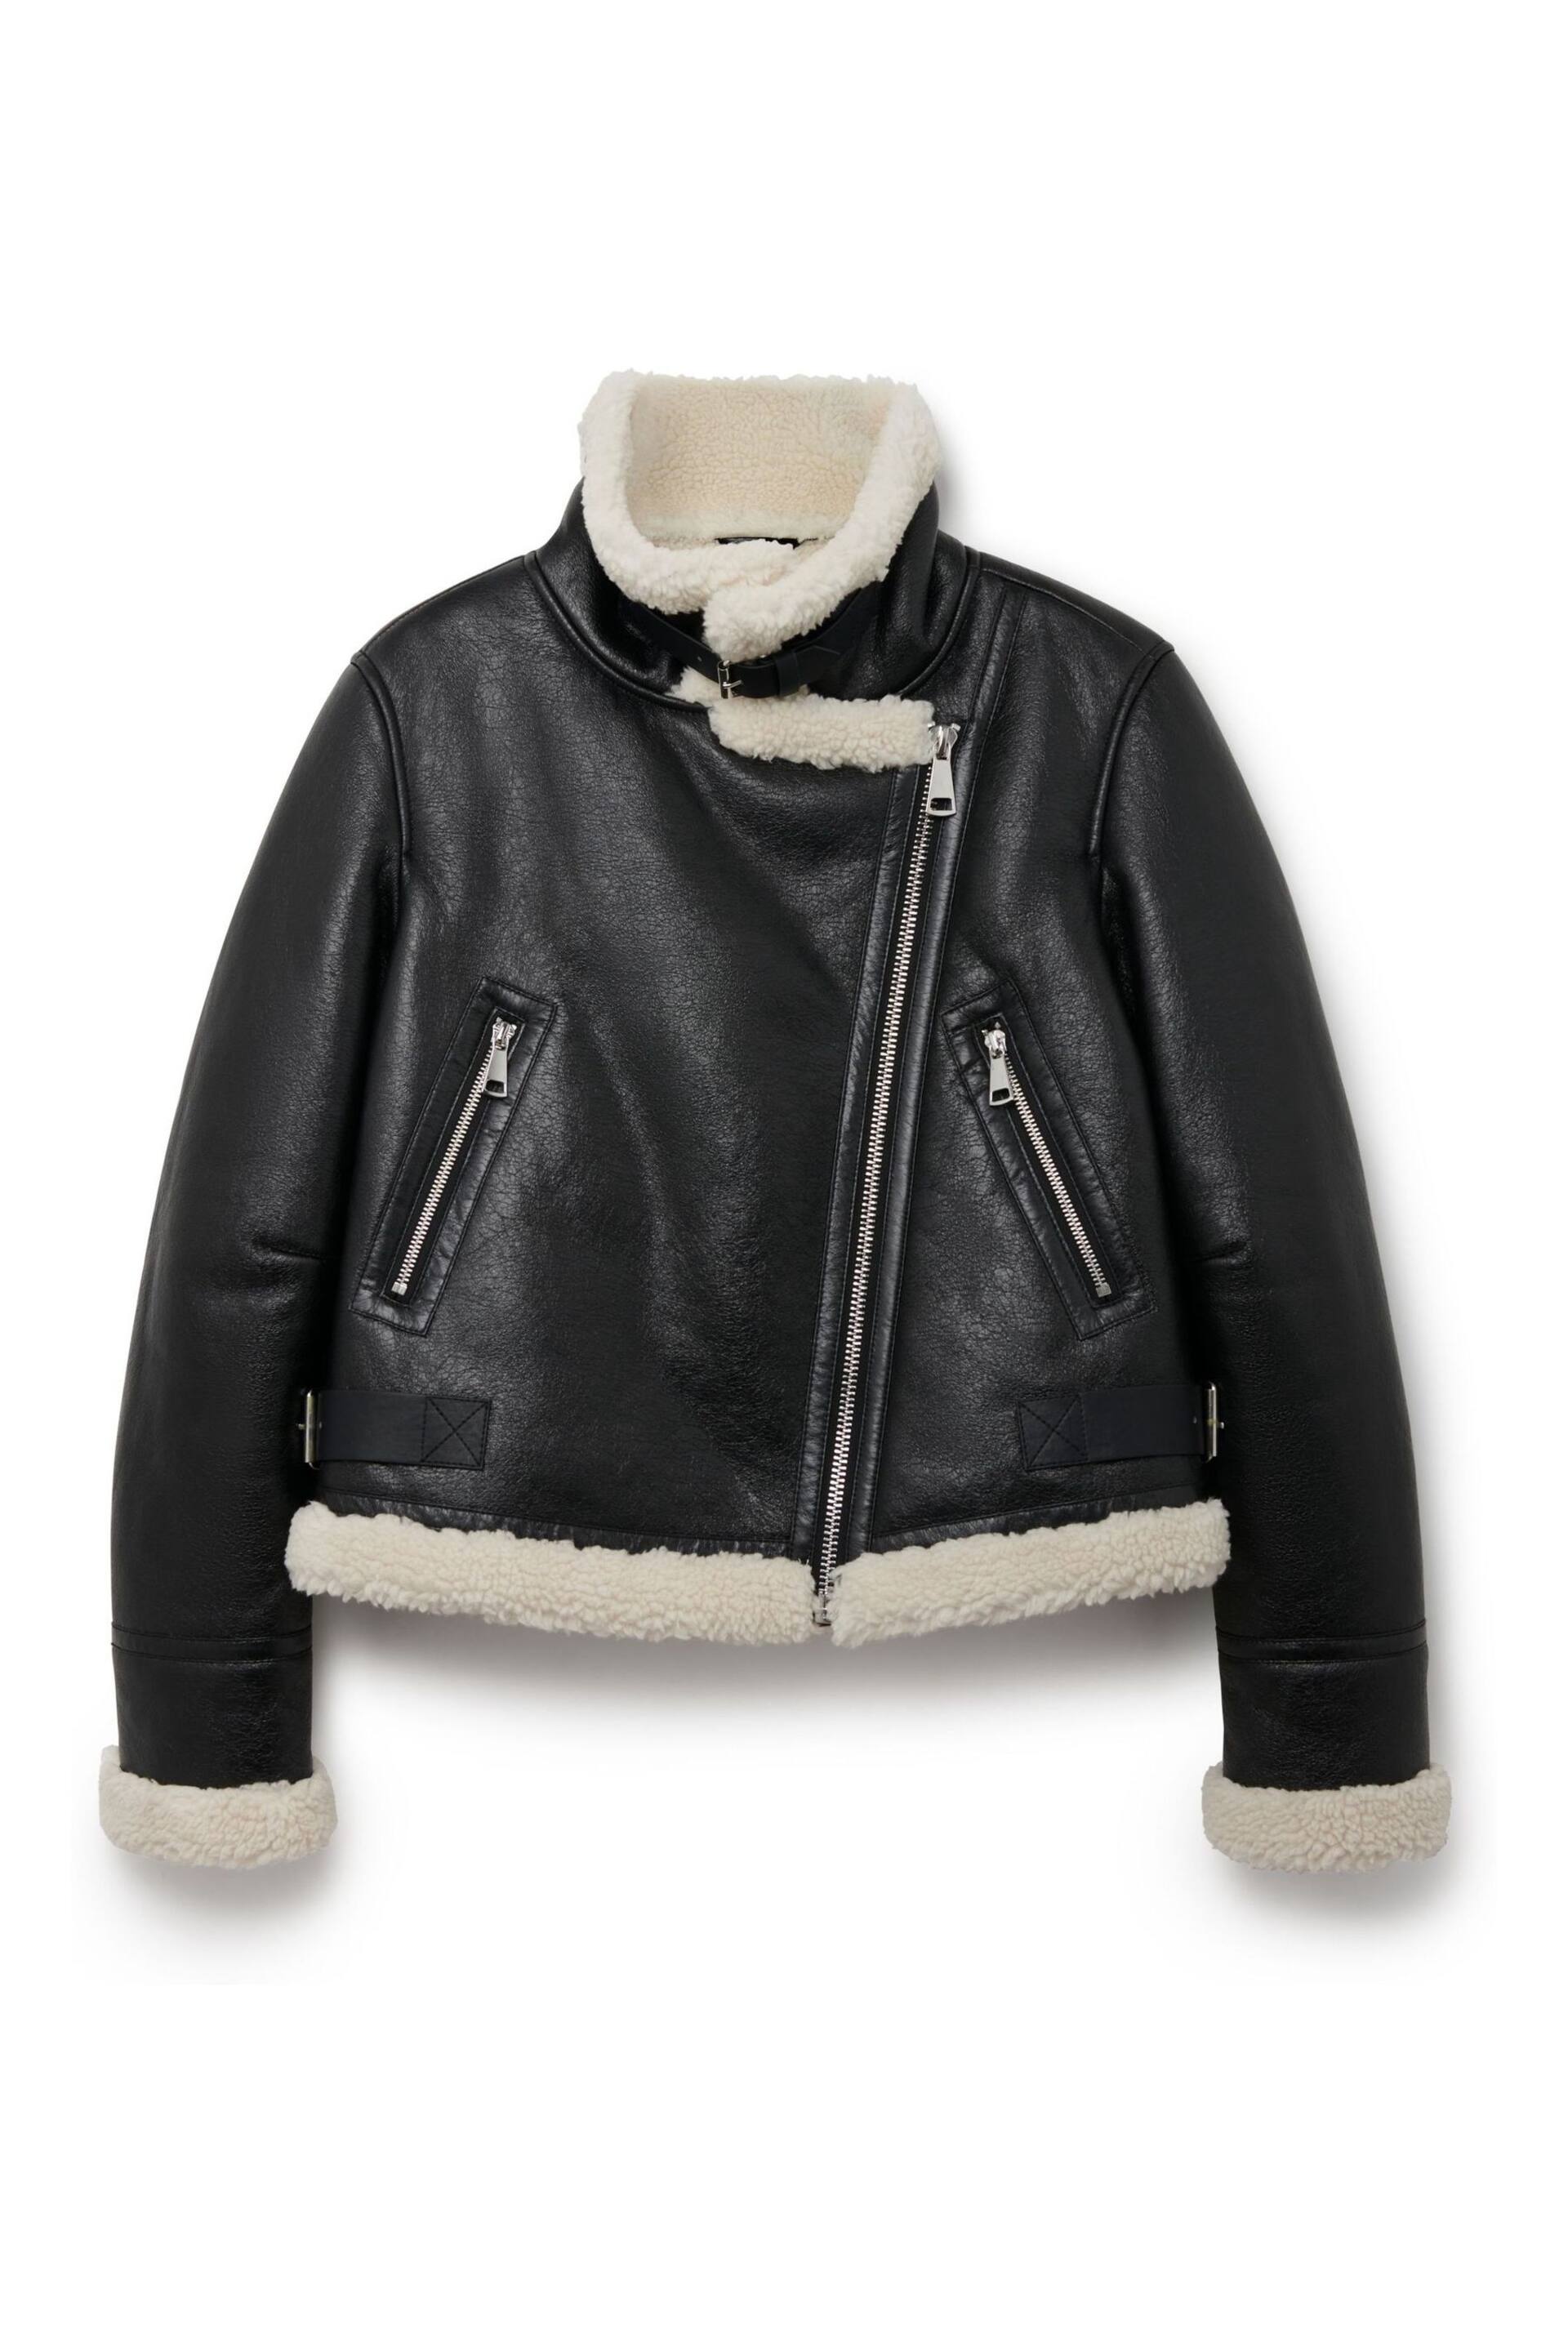 Another Sunday Bonded Aviator Jacket With Faux Fur Lining In Black - Image 4 of 6